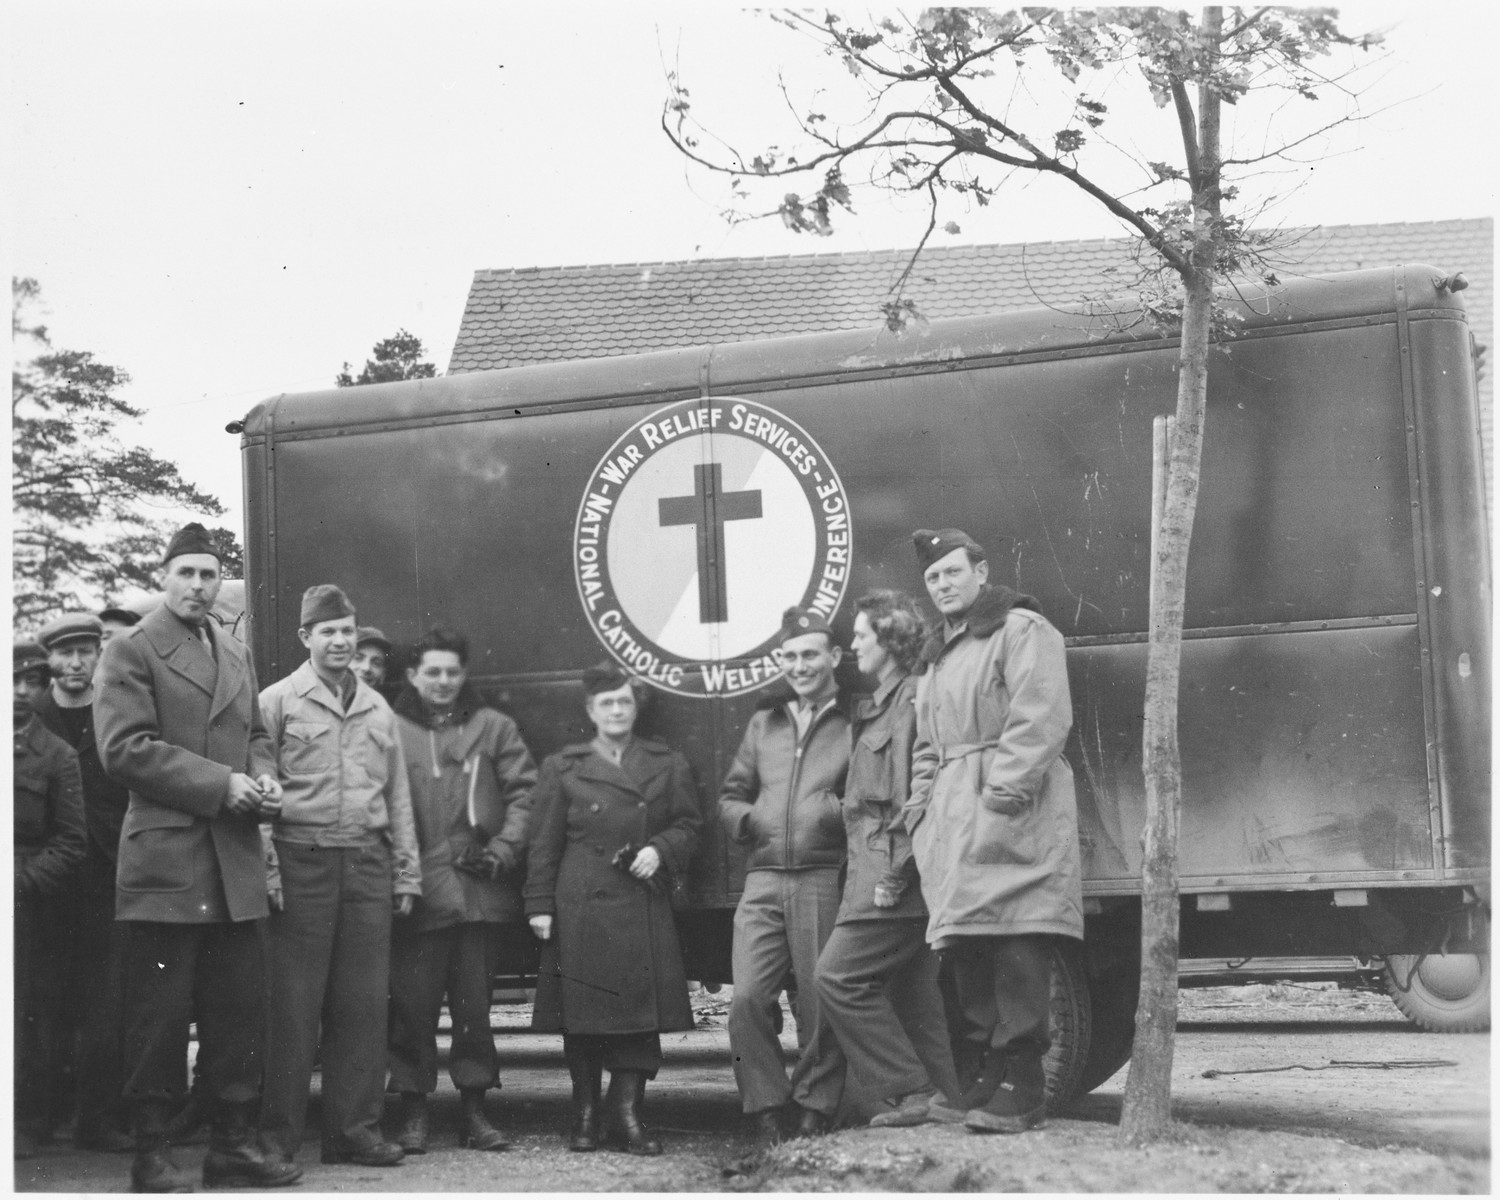 UNRRA workers stand next to an ambulance supplied by the National Catholic Welfare Conference (probably in the Foehrenwald displaced persons' camp).

Marion van Binsbergen Pritchard is pictured second from the right.